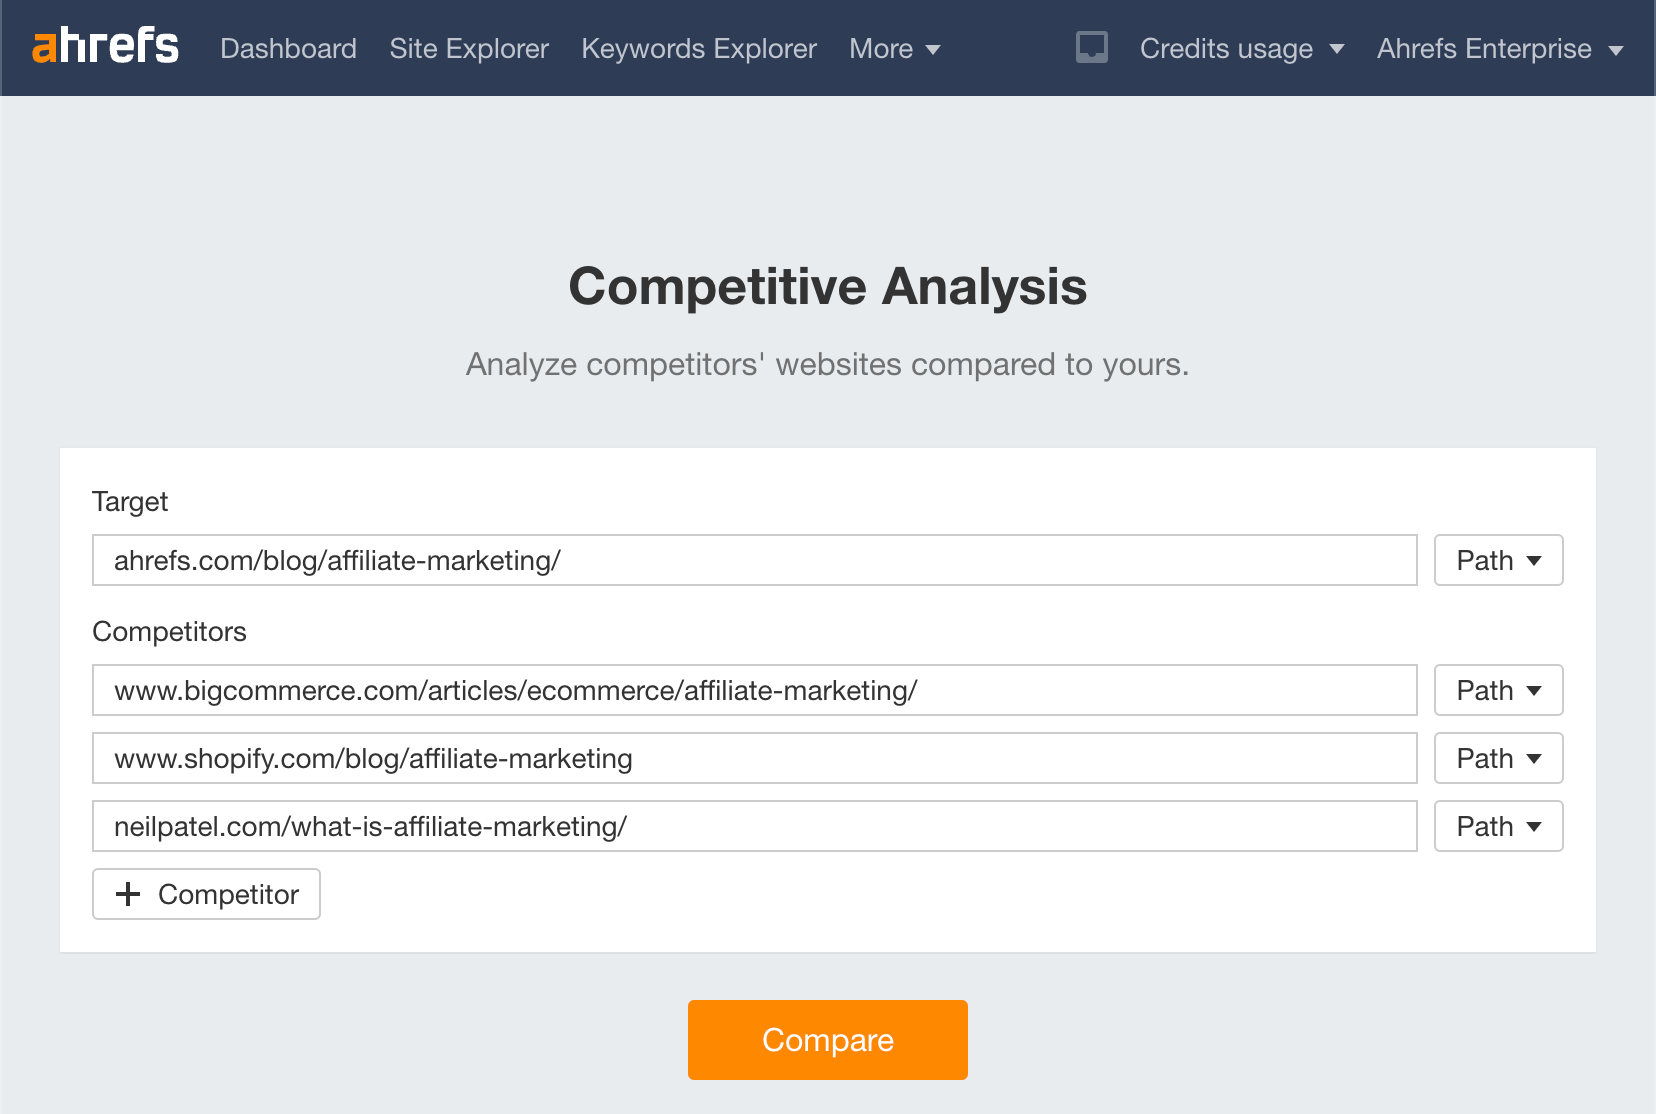 Using the Competitive Analysis tool in Ahrefs
